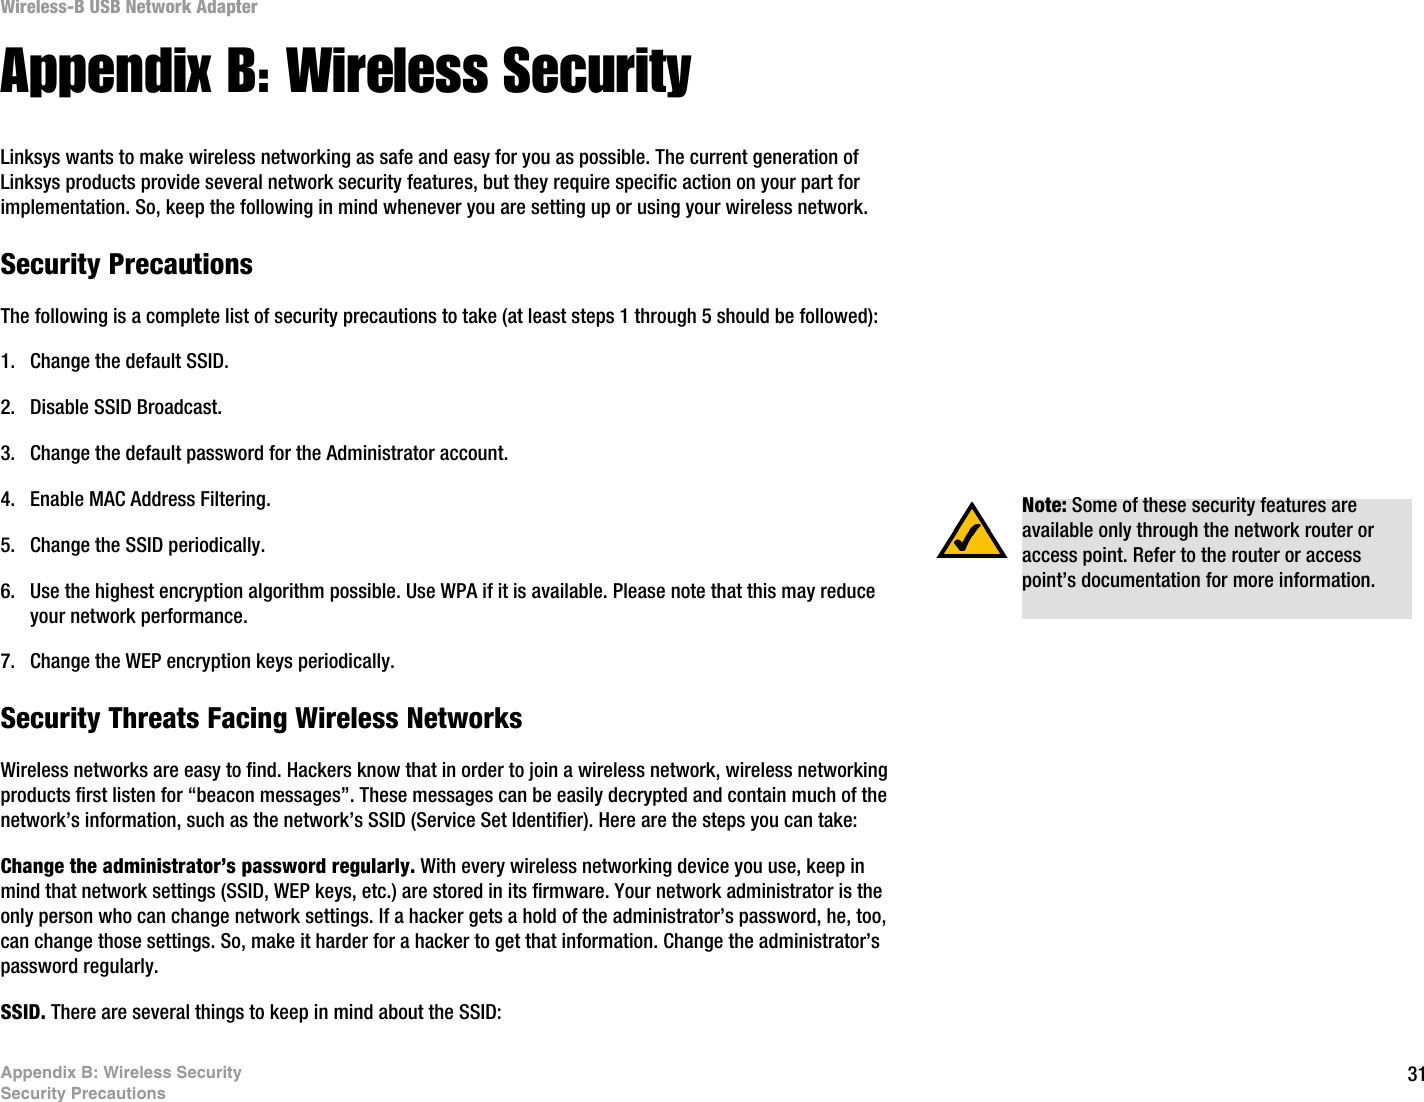 31Appendix B: Wireless SecuritySecurity PrecautionsWireless-B USB Network AdapterAppendix B: Wireless SecurityLinksys wants to make wireless networking as safe and easy for you as possible. The current generation of Linksys products provide several network security features, but they require specific action on your part for implementation. So, keep the following in mind whenever you are setting up or using your wireless network.Security PrecautionsThe following is a complete list of security precautions to take (at least steps 1 through 5 should be followed):1. Change the default SSID. 2. Disable SSID Broadcast. 3. Change the default password for the Administrator account. 4. Enable MAC Address Filtering. 5. Change the SSID periodically. 6. Use the highest encryption algorithm possible. Use WPA if it is available. Please note that this may reduce your network performance. 7. Change the WEP encryption keys periodically. Security Threats Facing Wireless Networks Wireless networks are easy to find. Hackers know that in order to join a wireless network, wireless networking products first listen for “beacon messages”. These messages can be easily decrypted and contain much of the network’s information, such as the network’s SSID (Service Set Identifier). Here are the steps you can take:Change the administrator’s password regularly. With every wireless networking device you use, keep in mind that network settings (SSID, WEP keys, etc.) are stored in its firmware. Your network administrator is the only person who can change network settings. If a hacker gets a hold of the administrator’s password, he, too, can change those settings. So, make it harder for a hacker to get that information. Change the administrator’s password regularly.SSID. There are several things to keep in mind about the SSID: Note: Some of these security features are available only through the network router or access point. Refer to the router or access point’s documentation for more information.